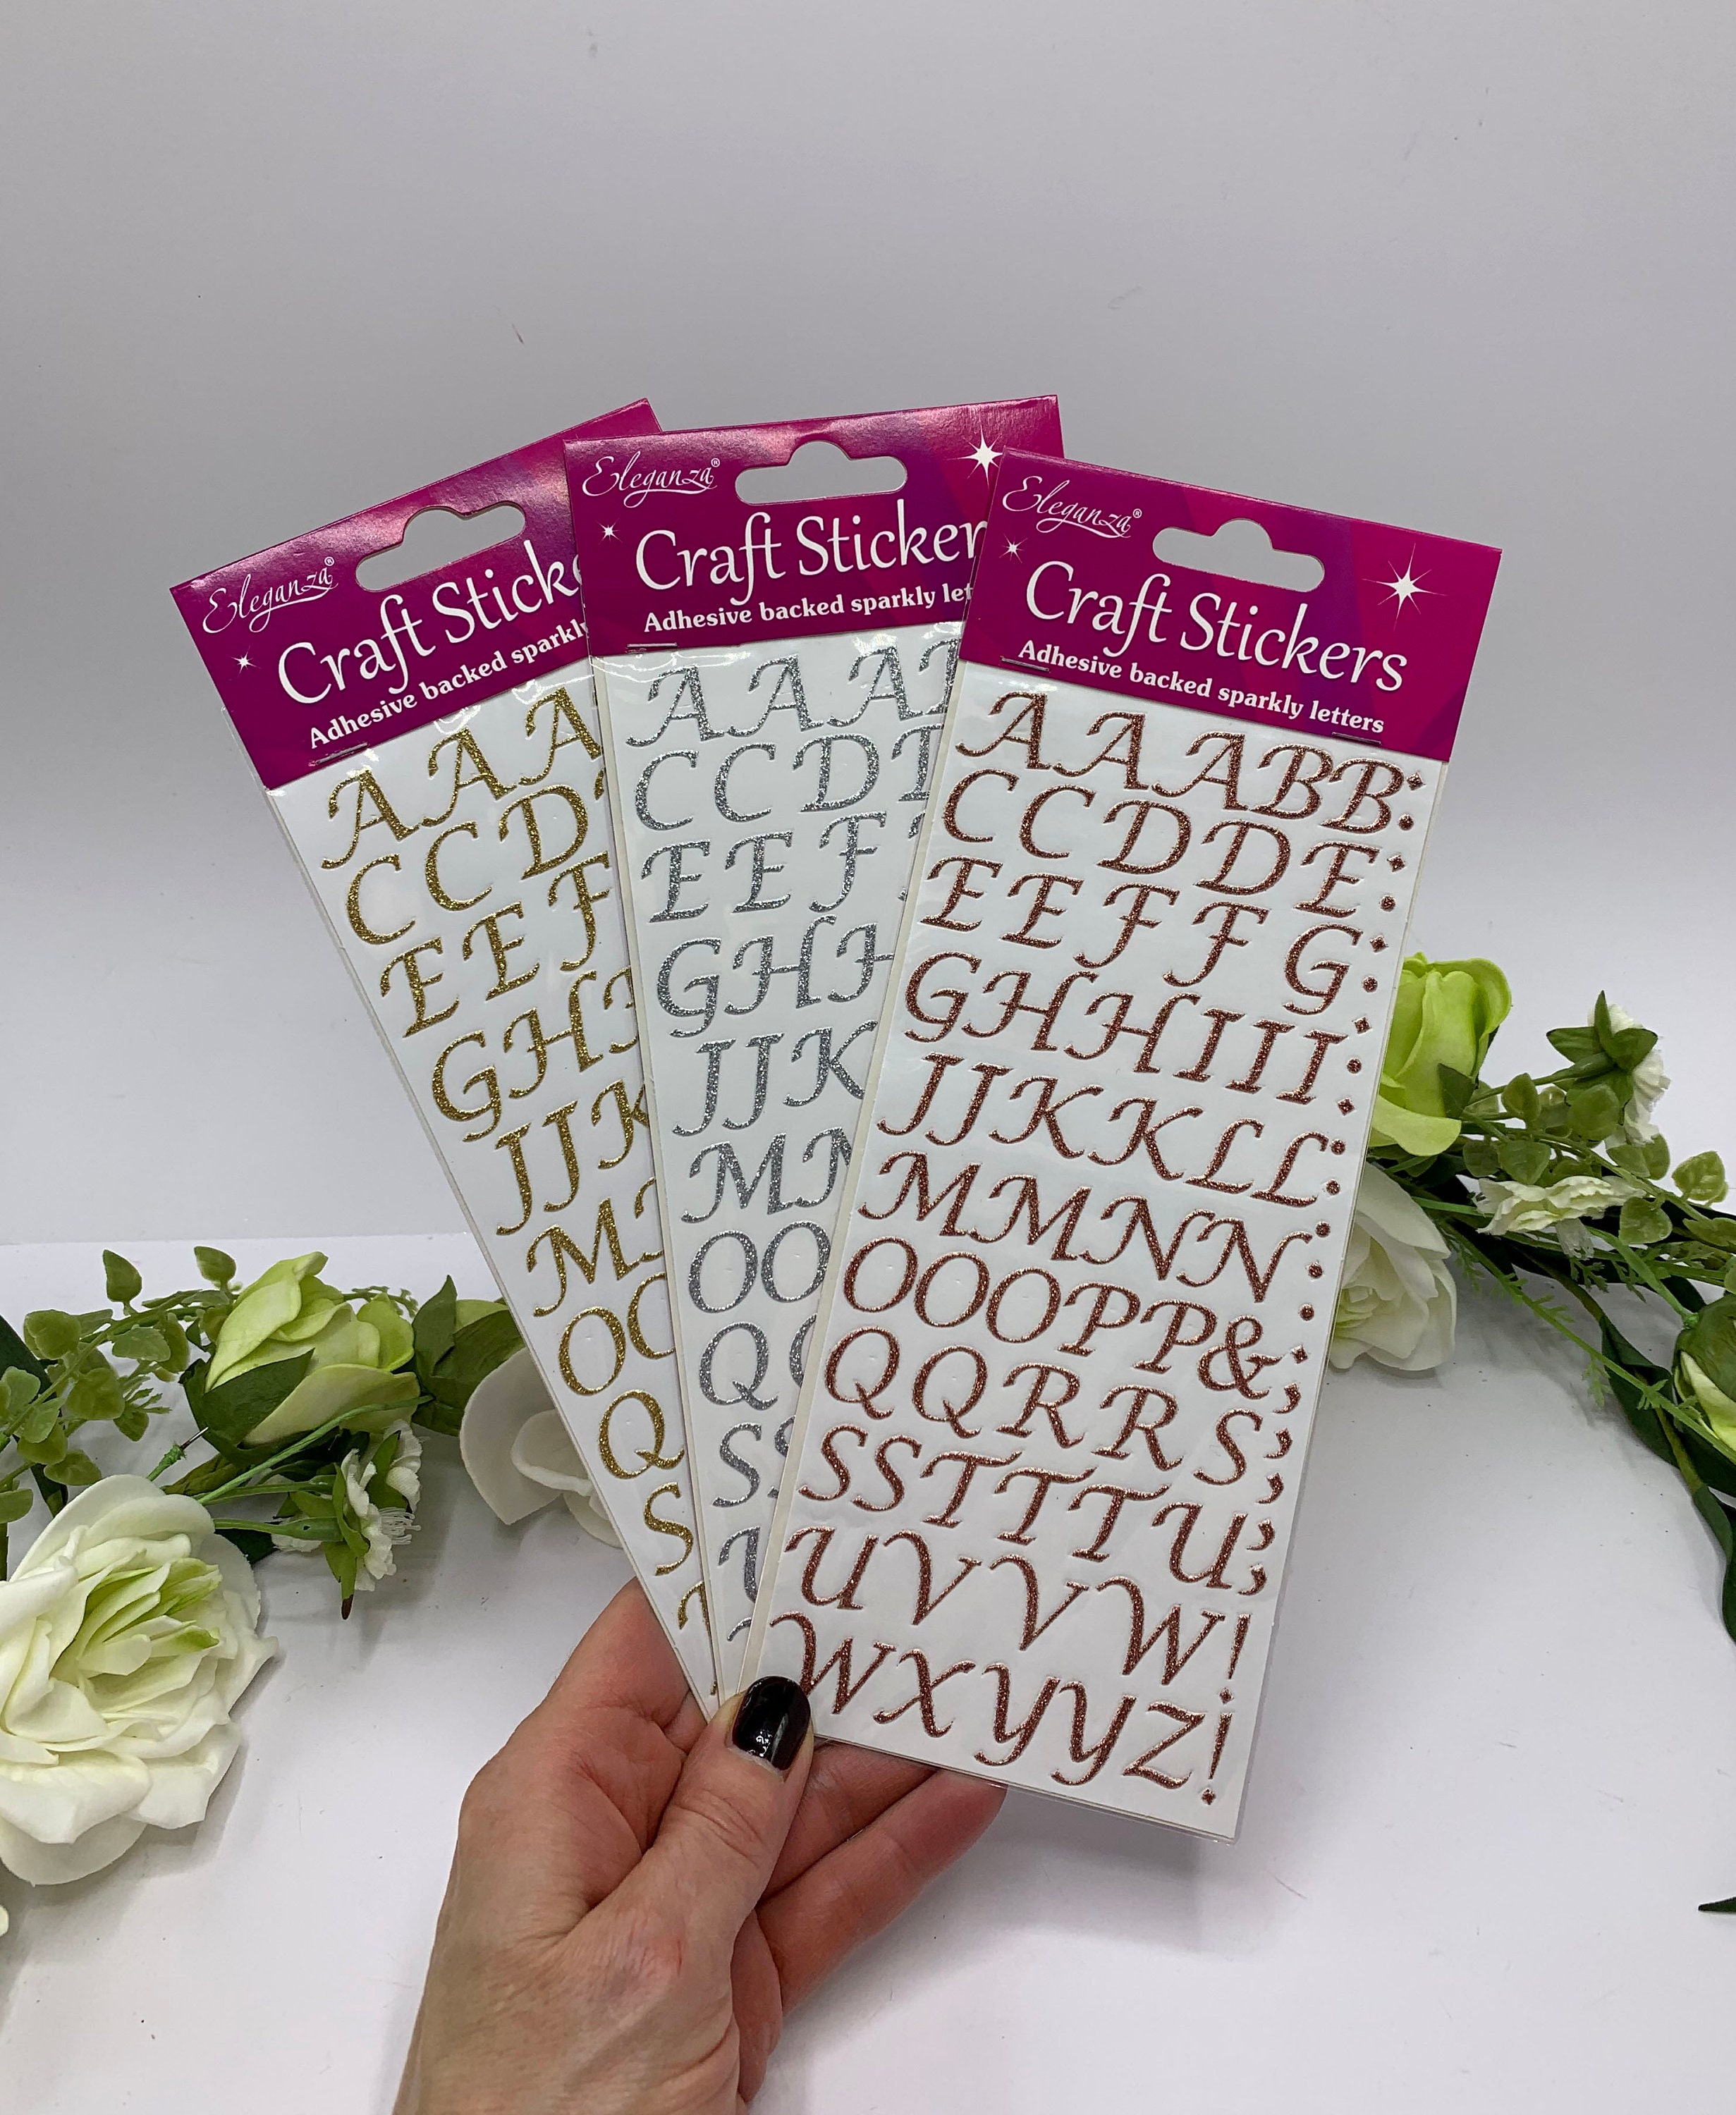 Pearl Letter or Number Stickers, Peel off White Pearl Effect Embellishment  for Weddings and Paper Crafts 